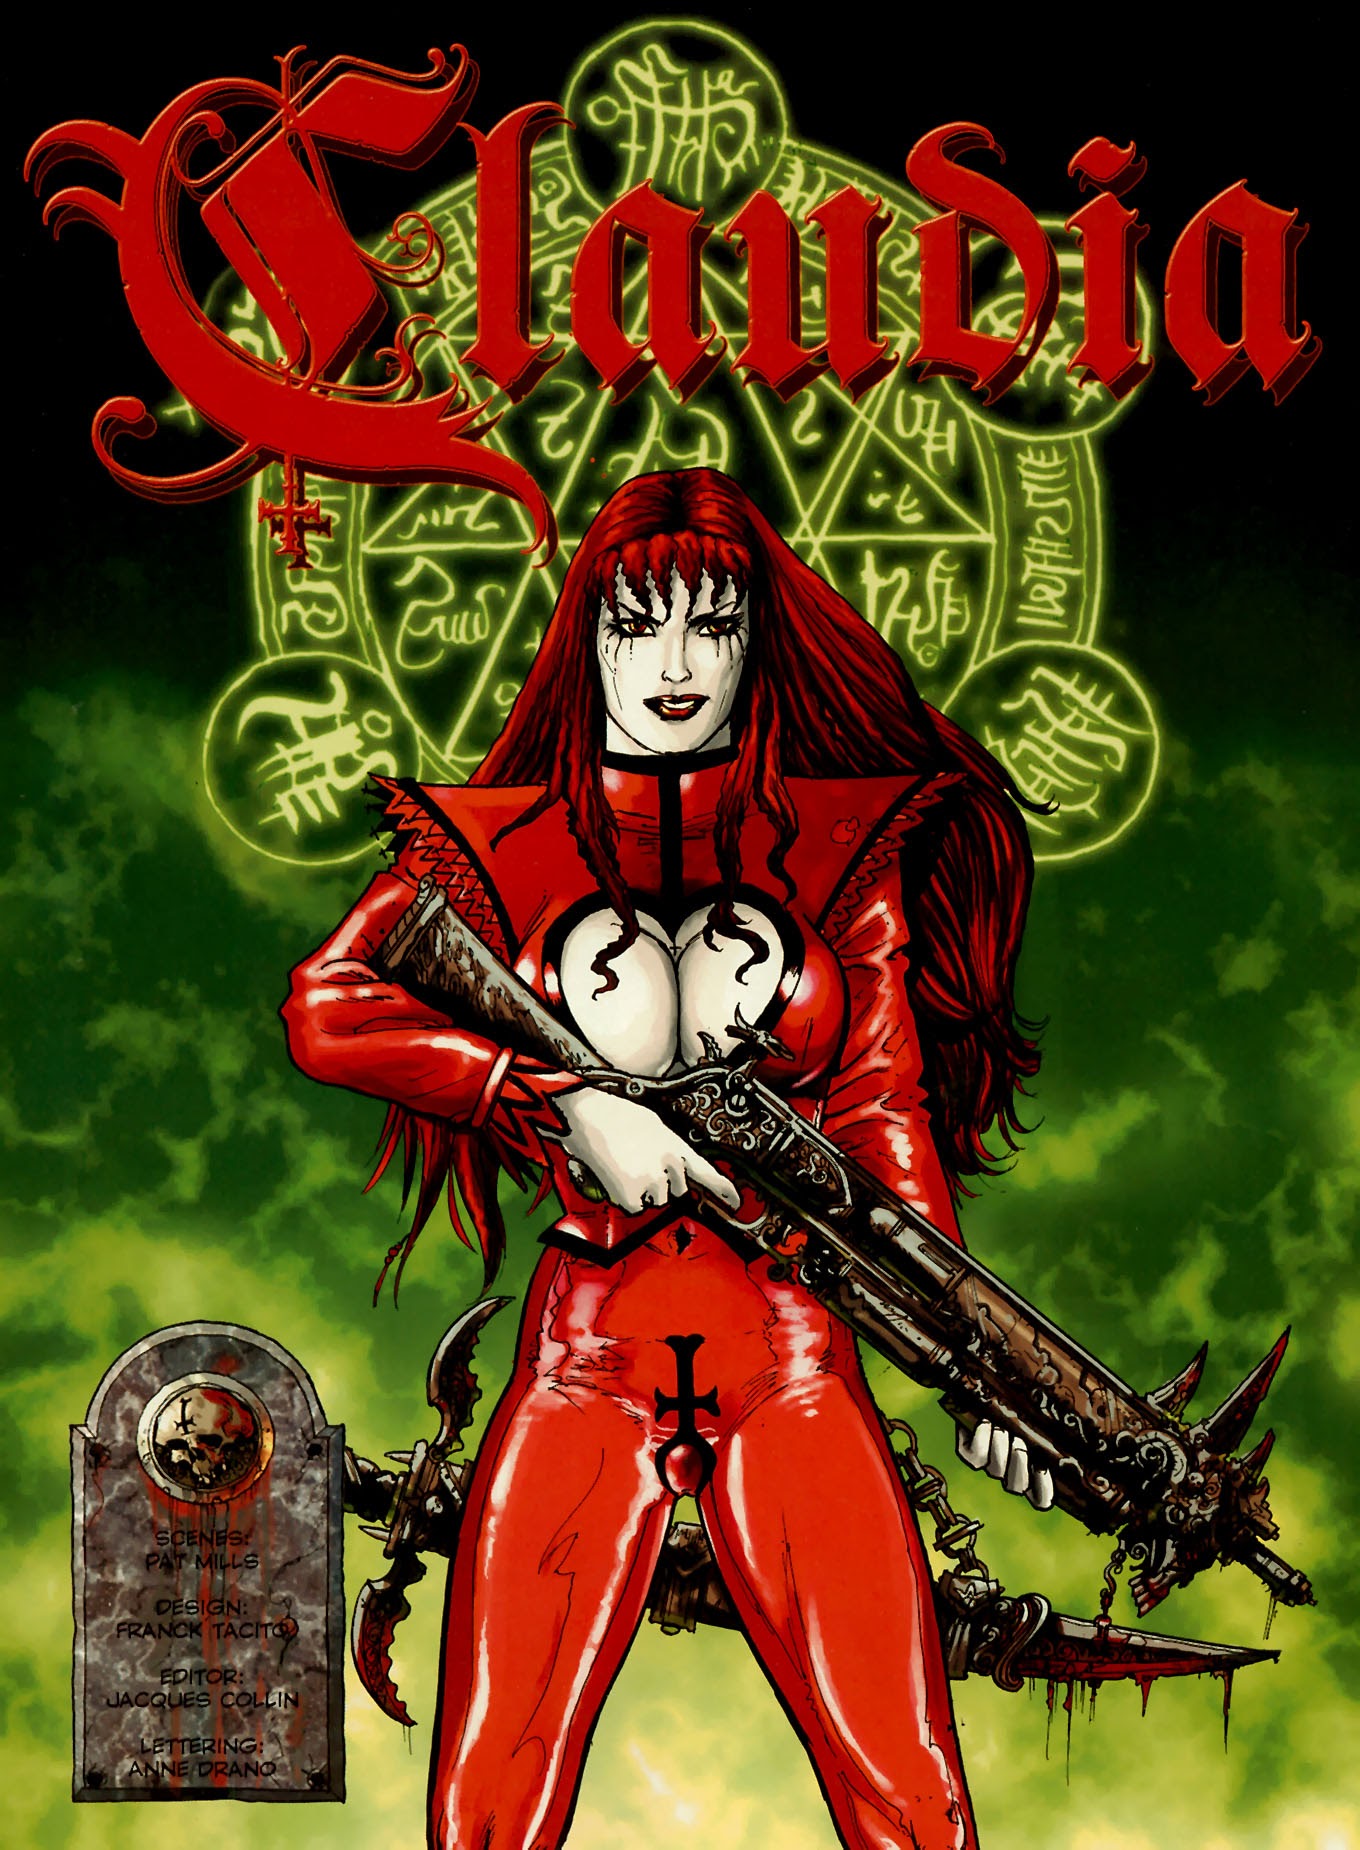 Claudia Vampire Knight Issue 2 | Read Claudia Vampire Knight Issue 2 comic  online in high quality. Read Full Comic online for free - Read comics  online in high quality .